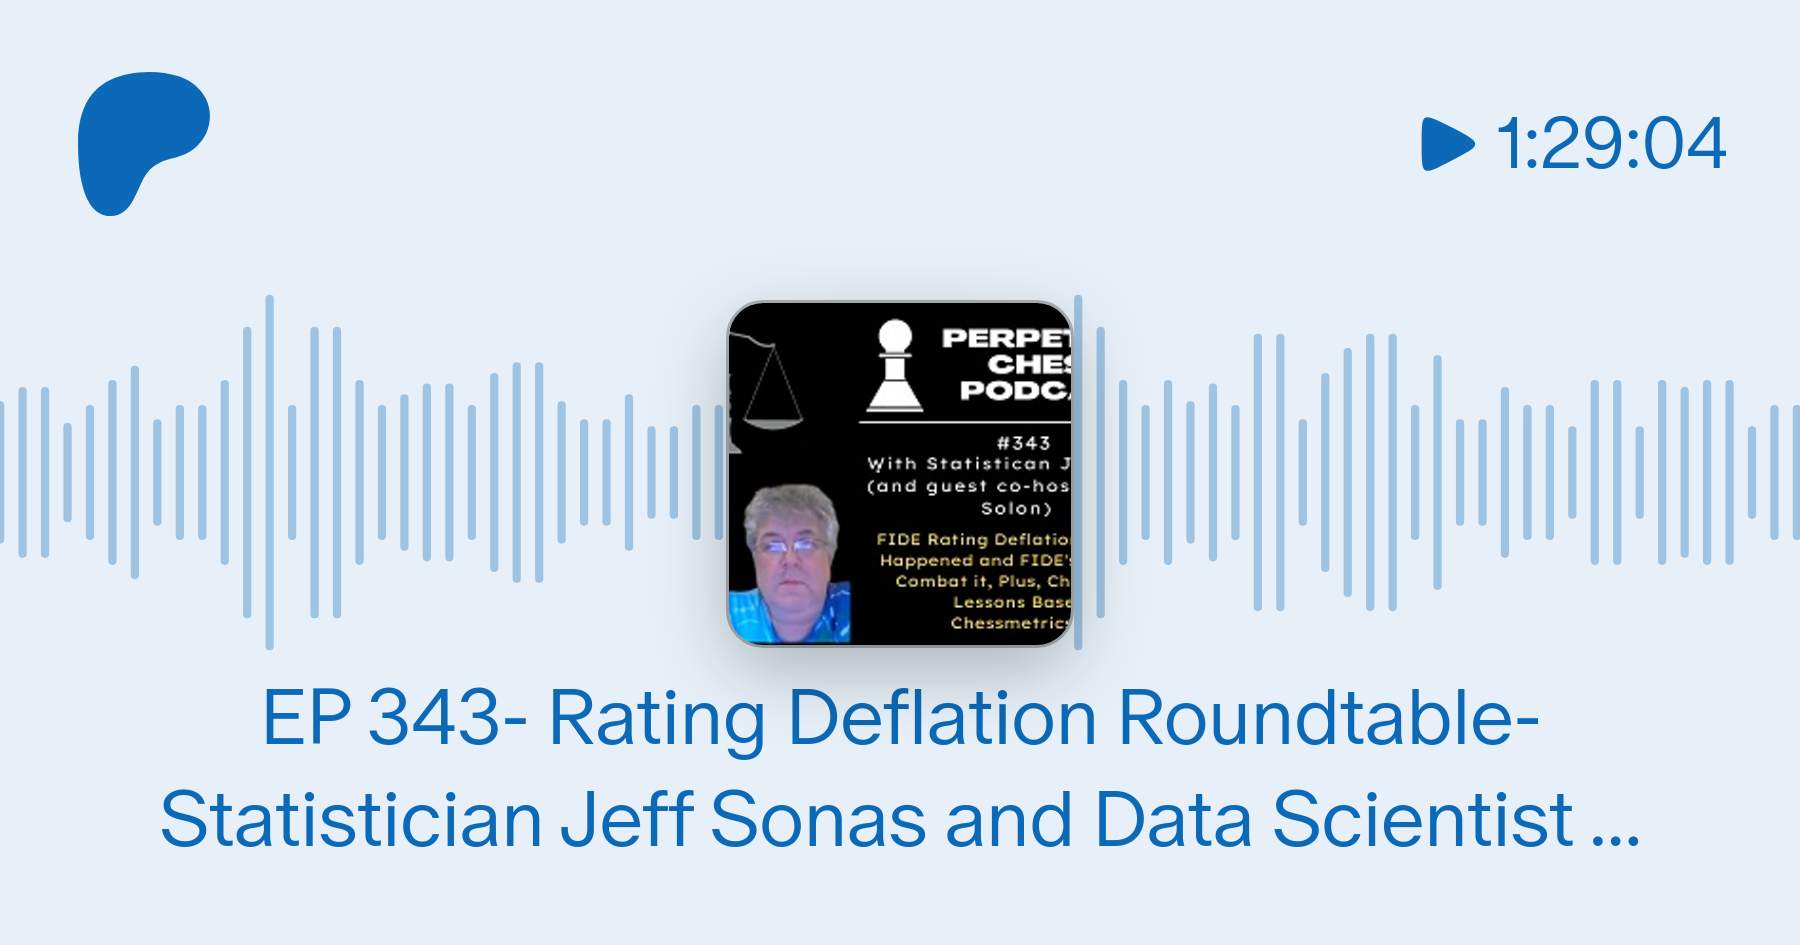 EP 343- Rating Deflation Roundtable- with Statistician Jeff Sonas